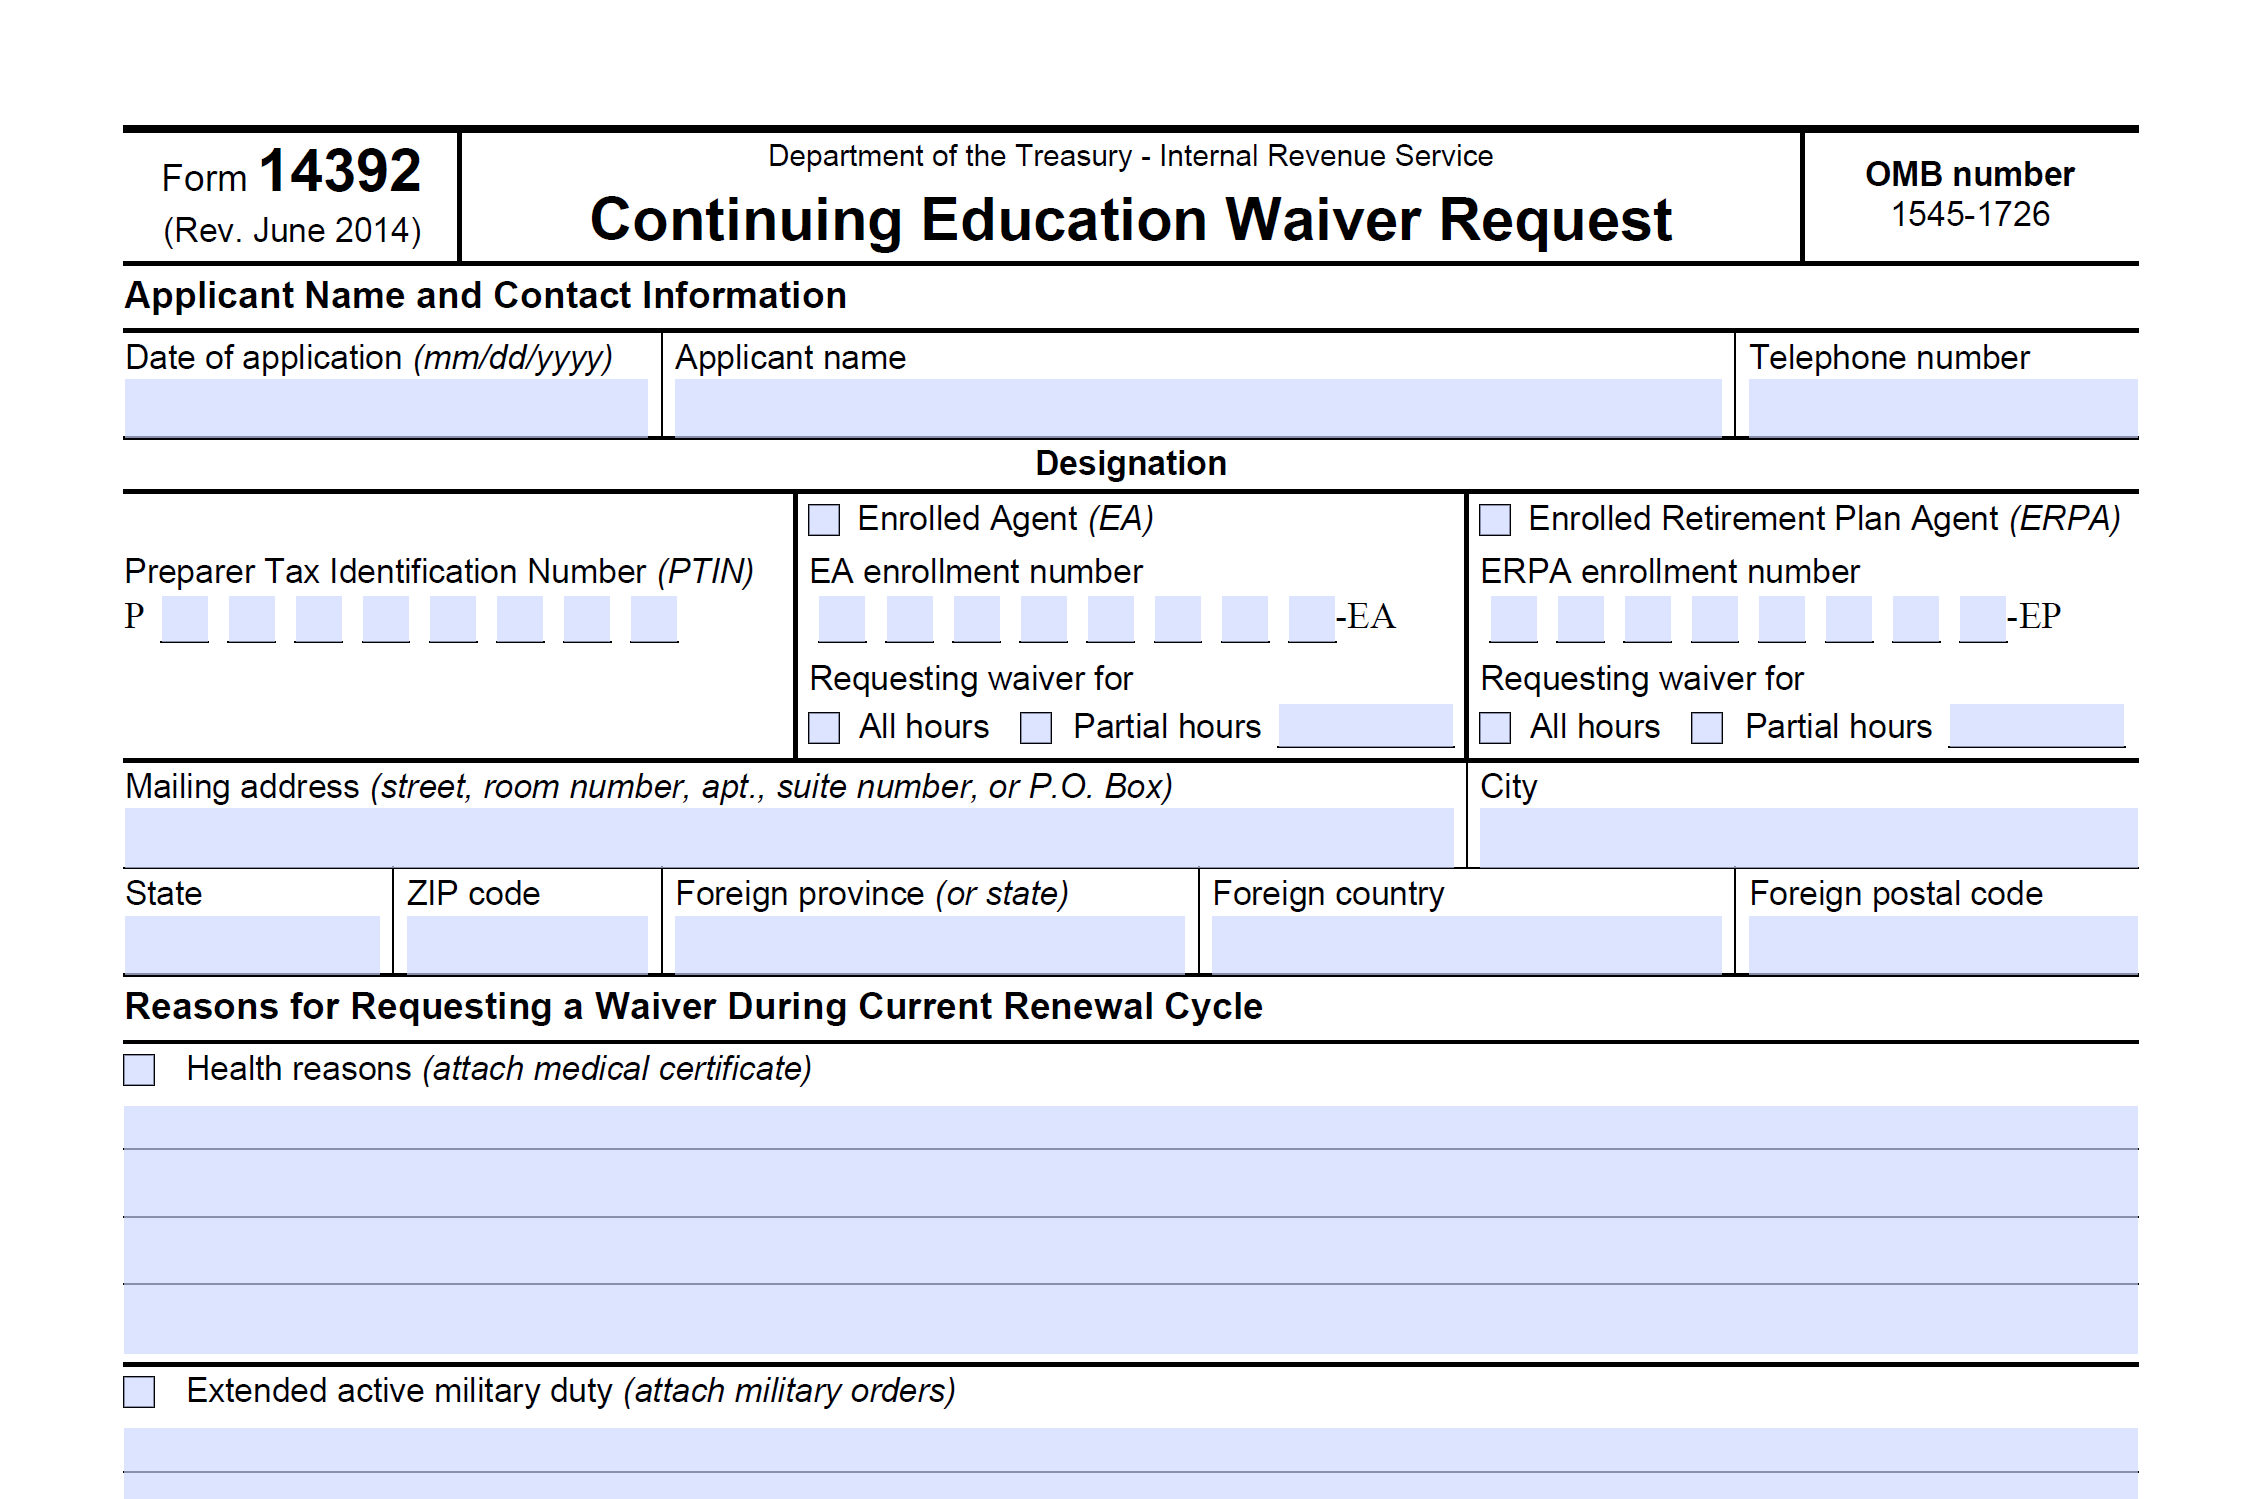 Form 14392: Continuing Education Waiver Request